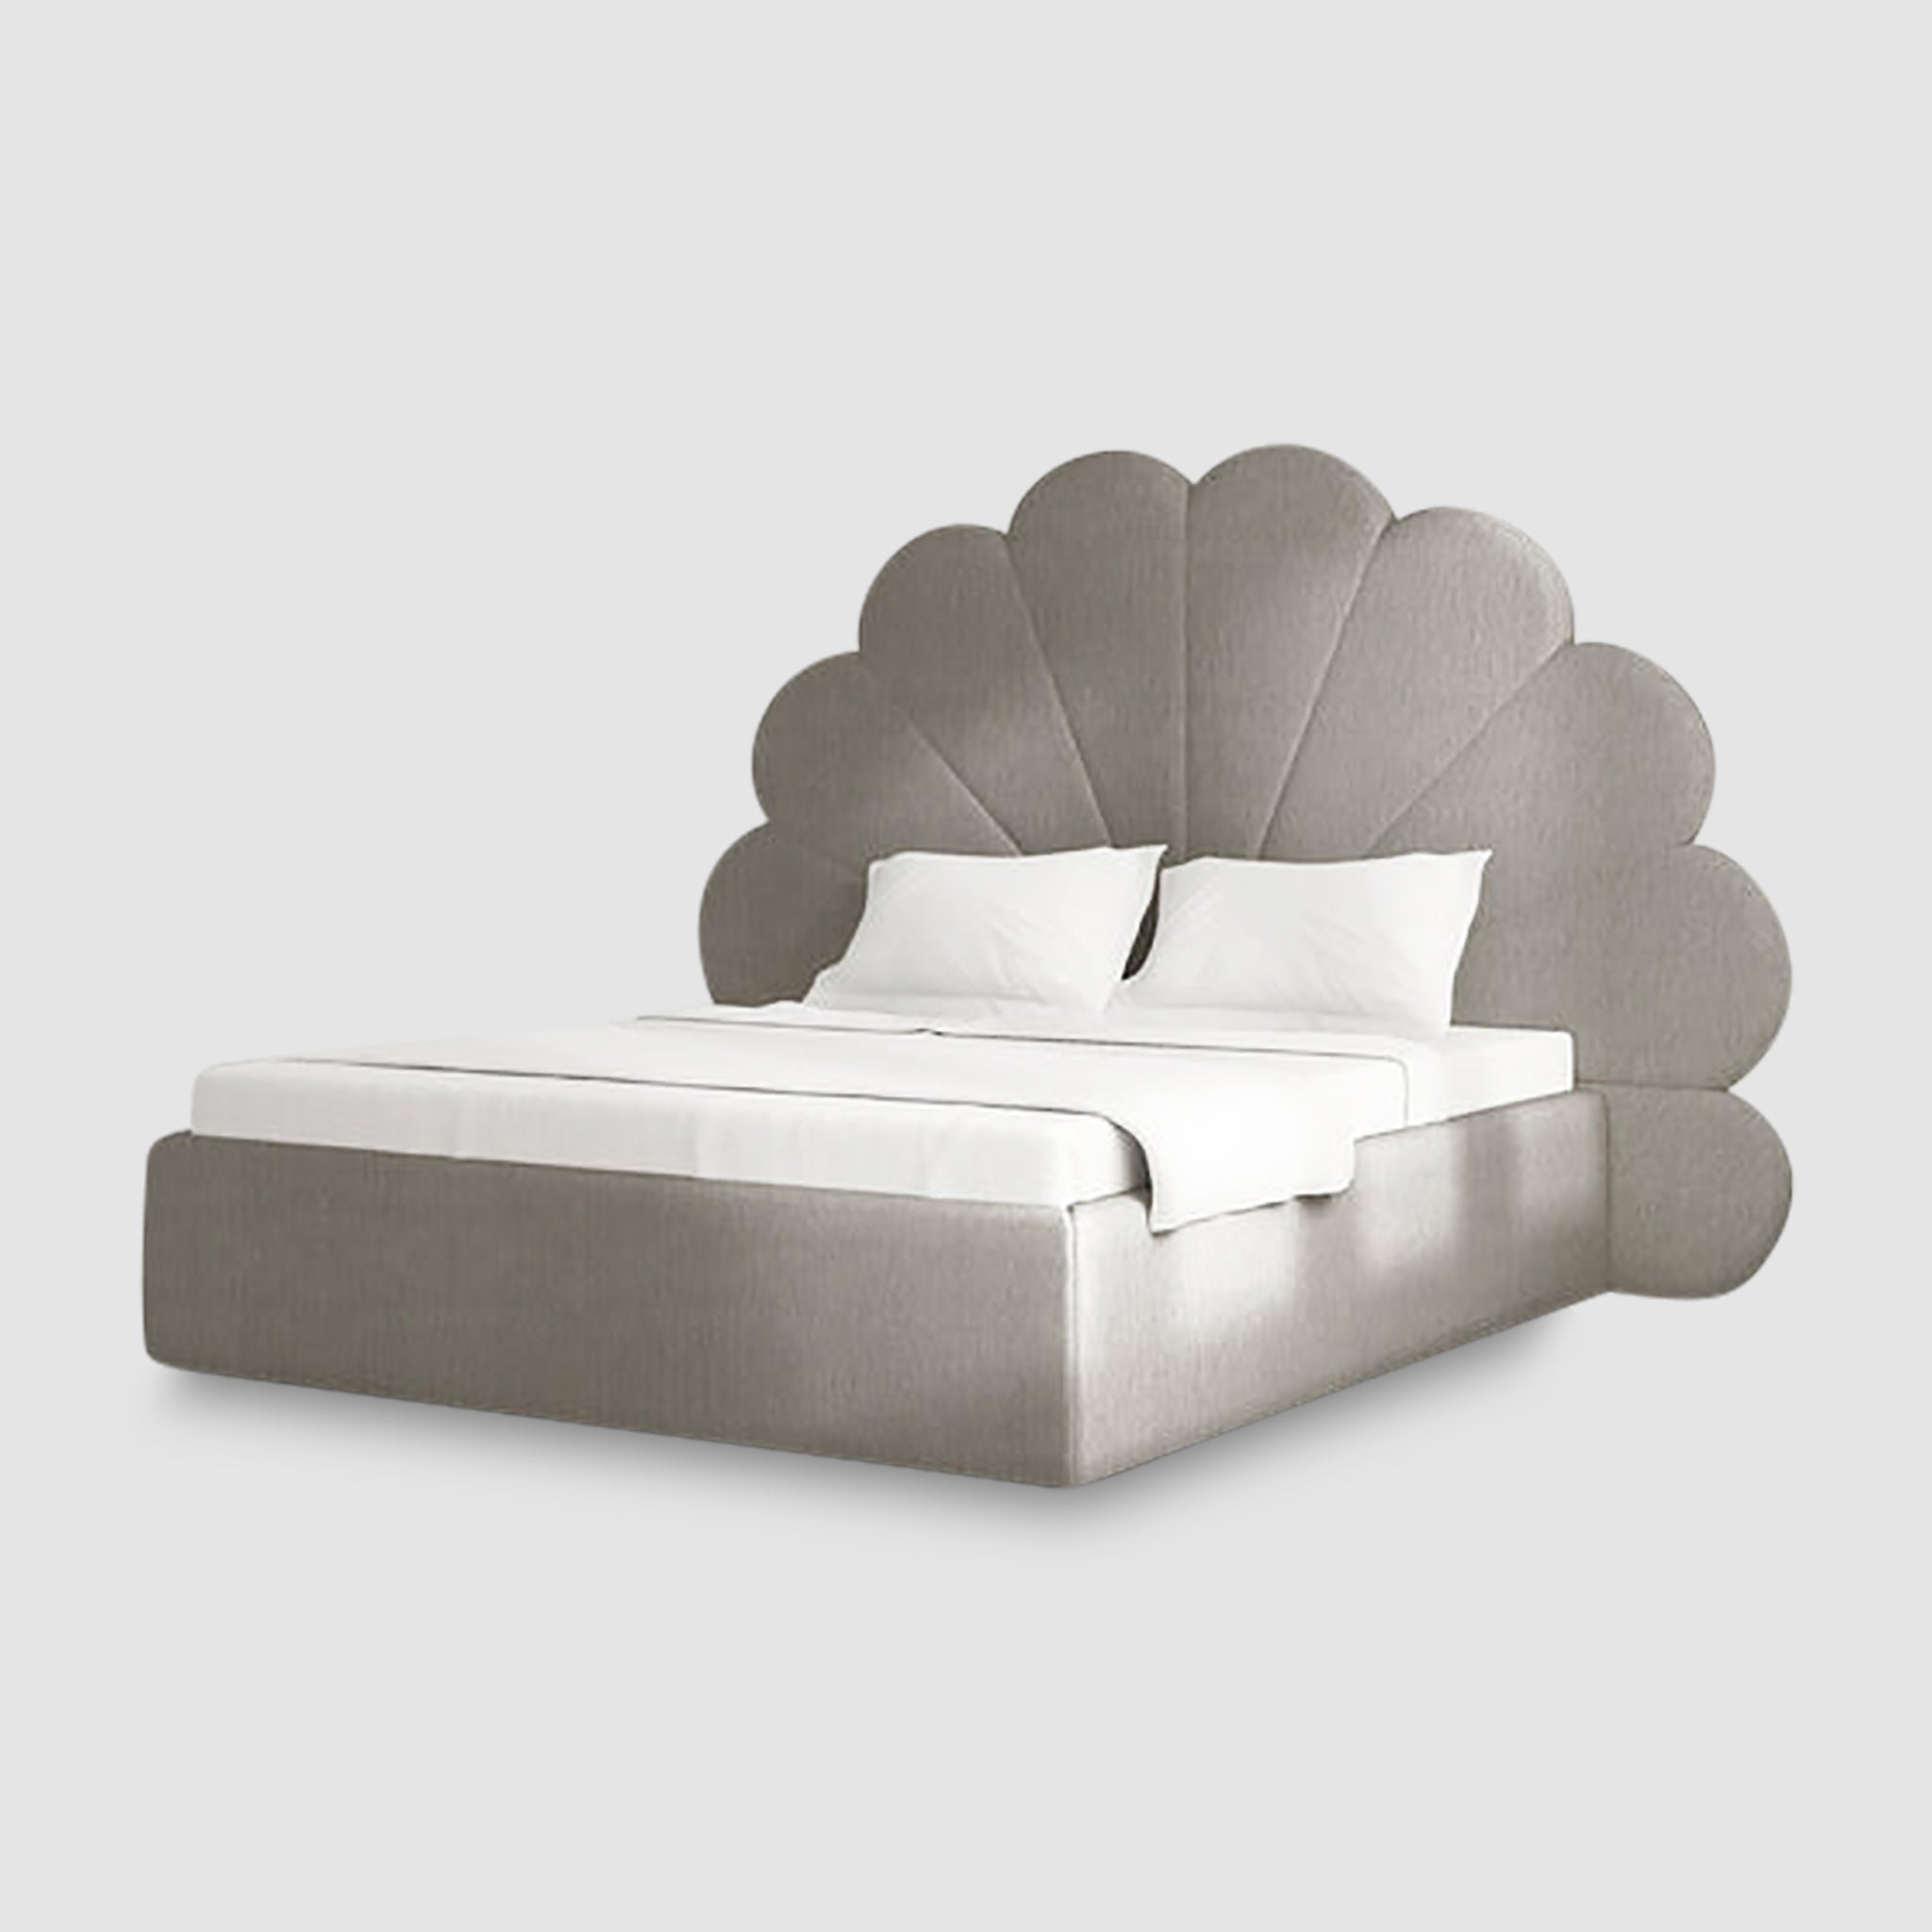 The Kyle Bed with plush velvet for superior comfort